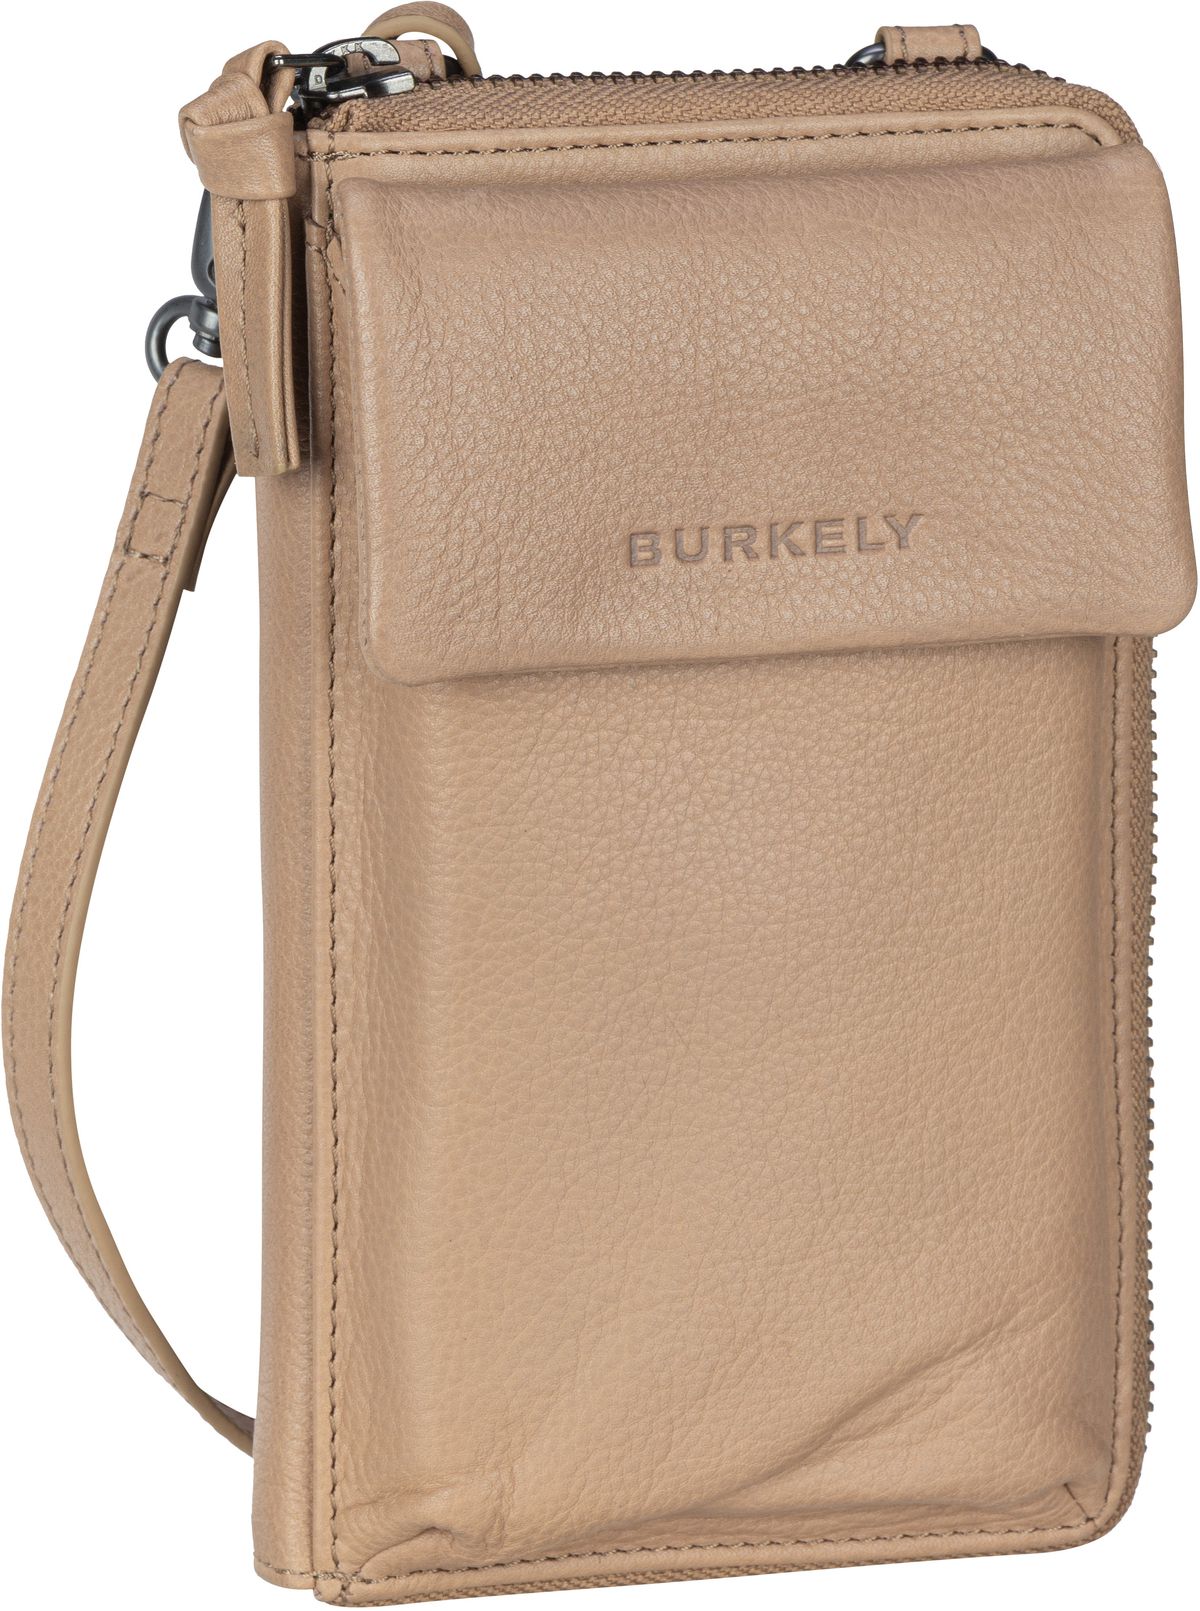 Burkely Just Jolie Phone Wallet - Taupe